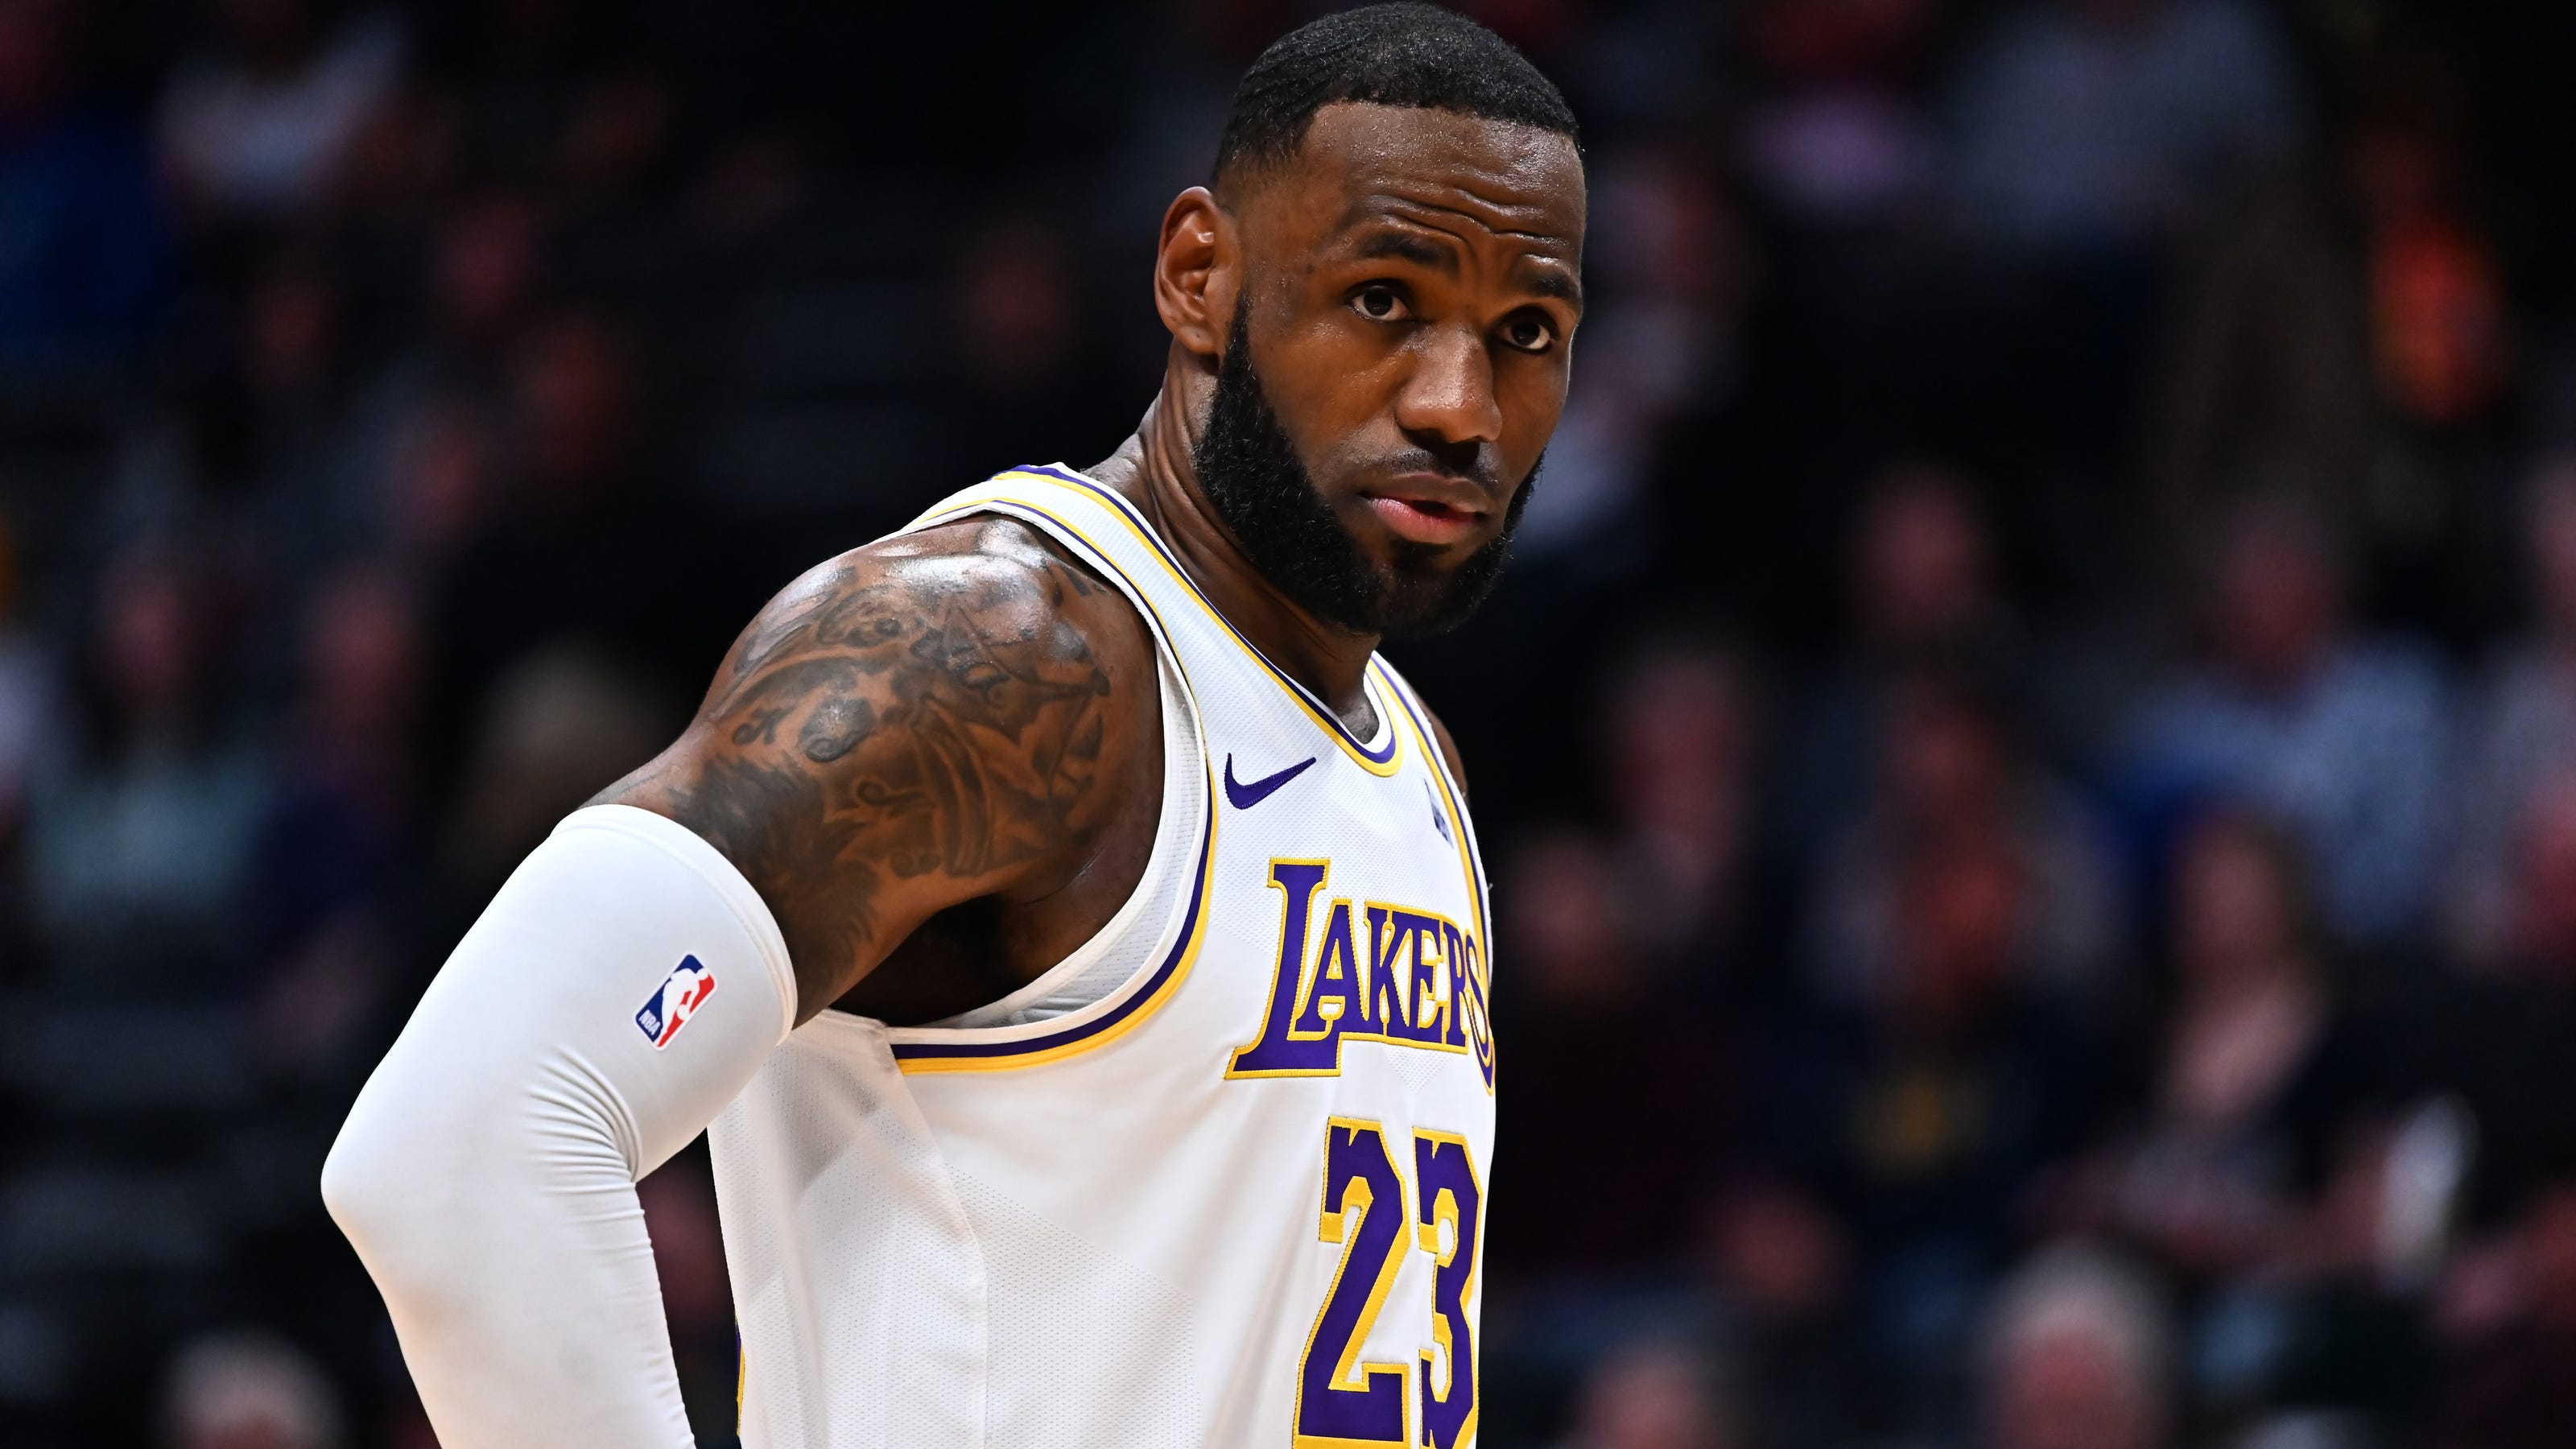 LeBron James responds to Jazz announcers' rant about his sideline cele...